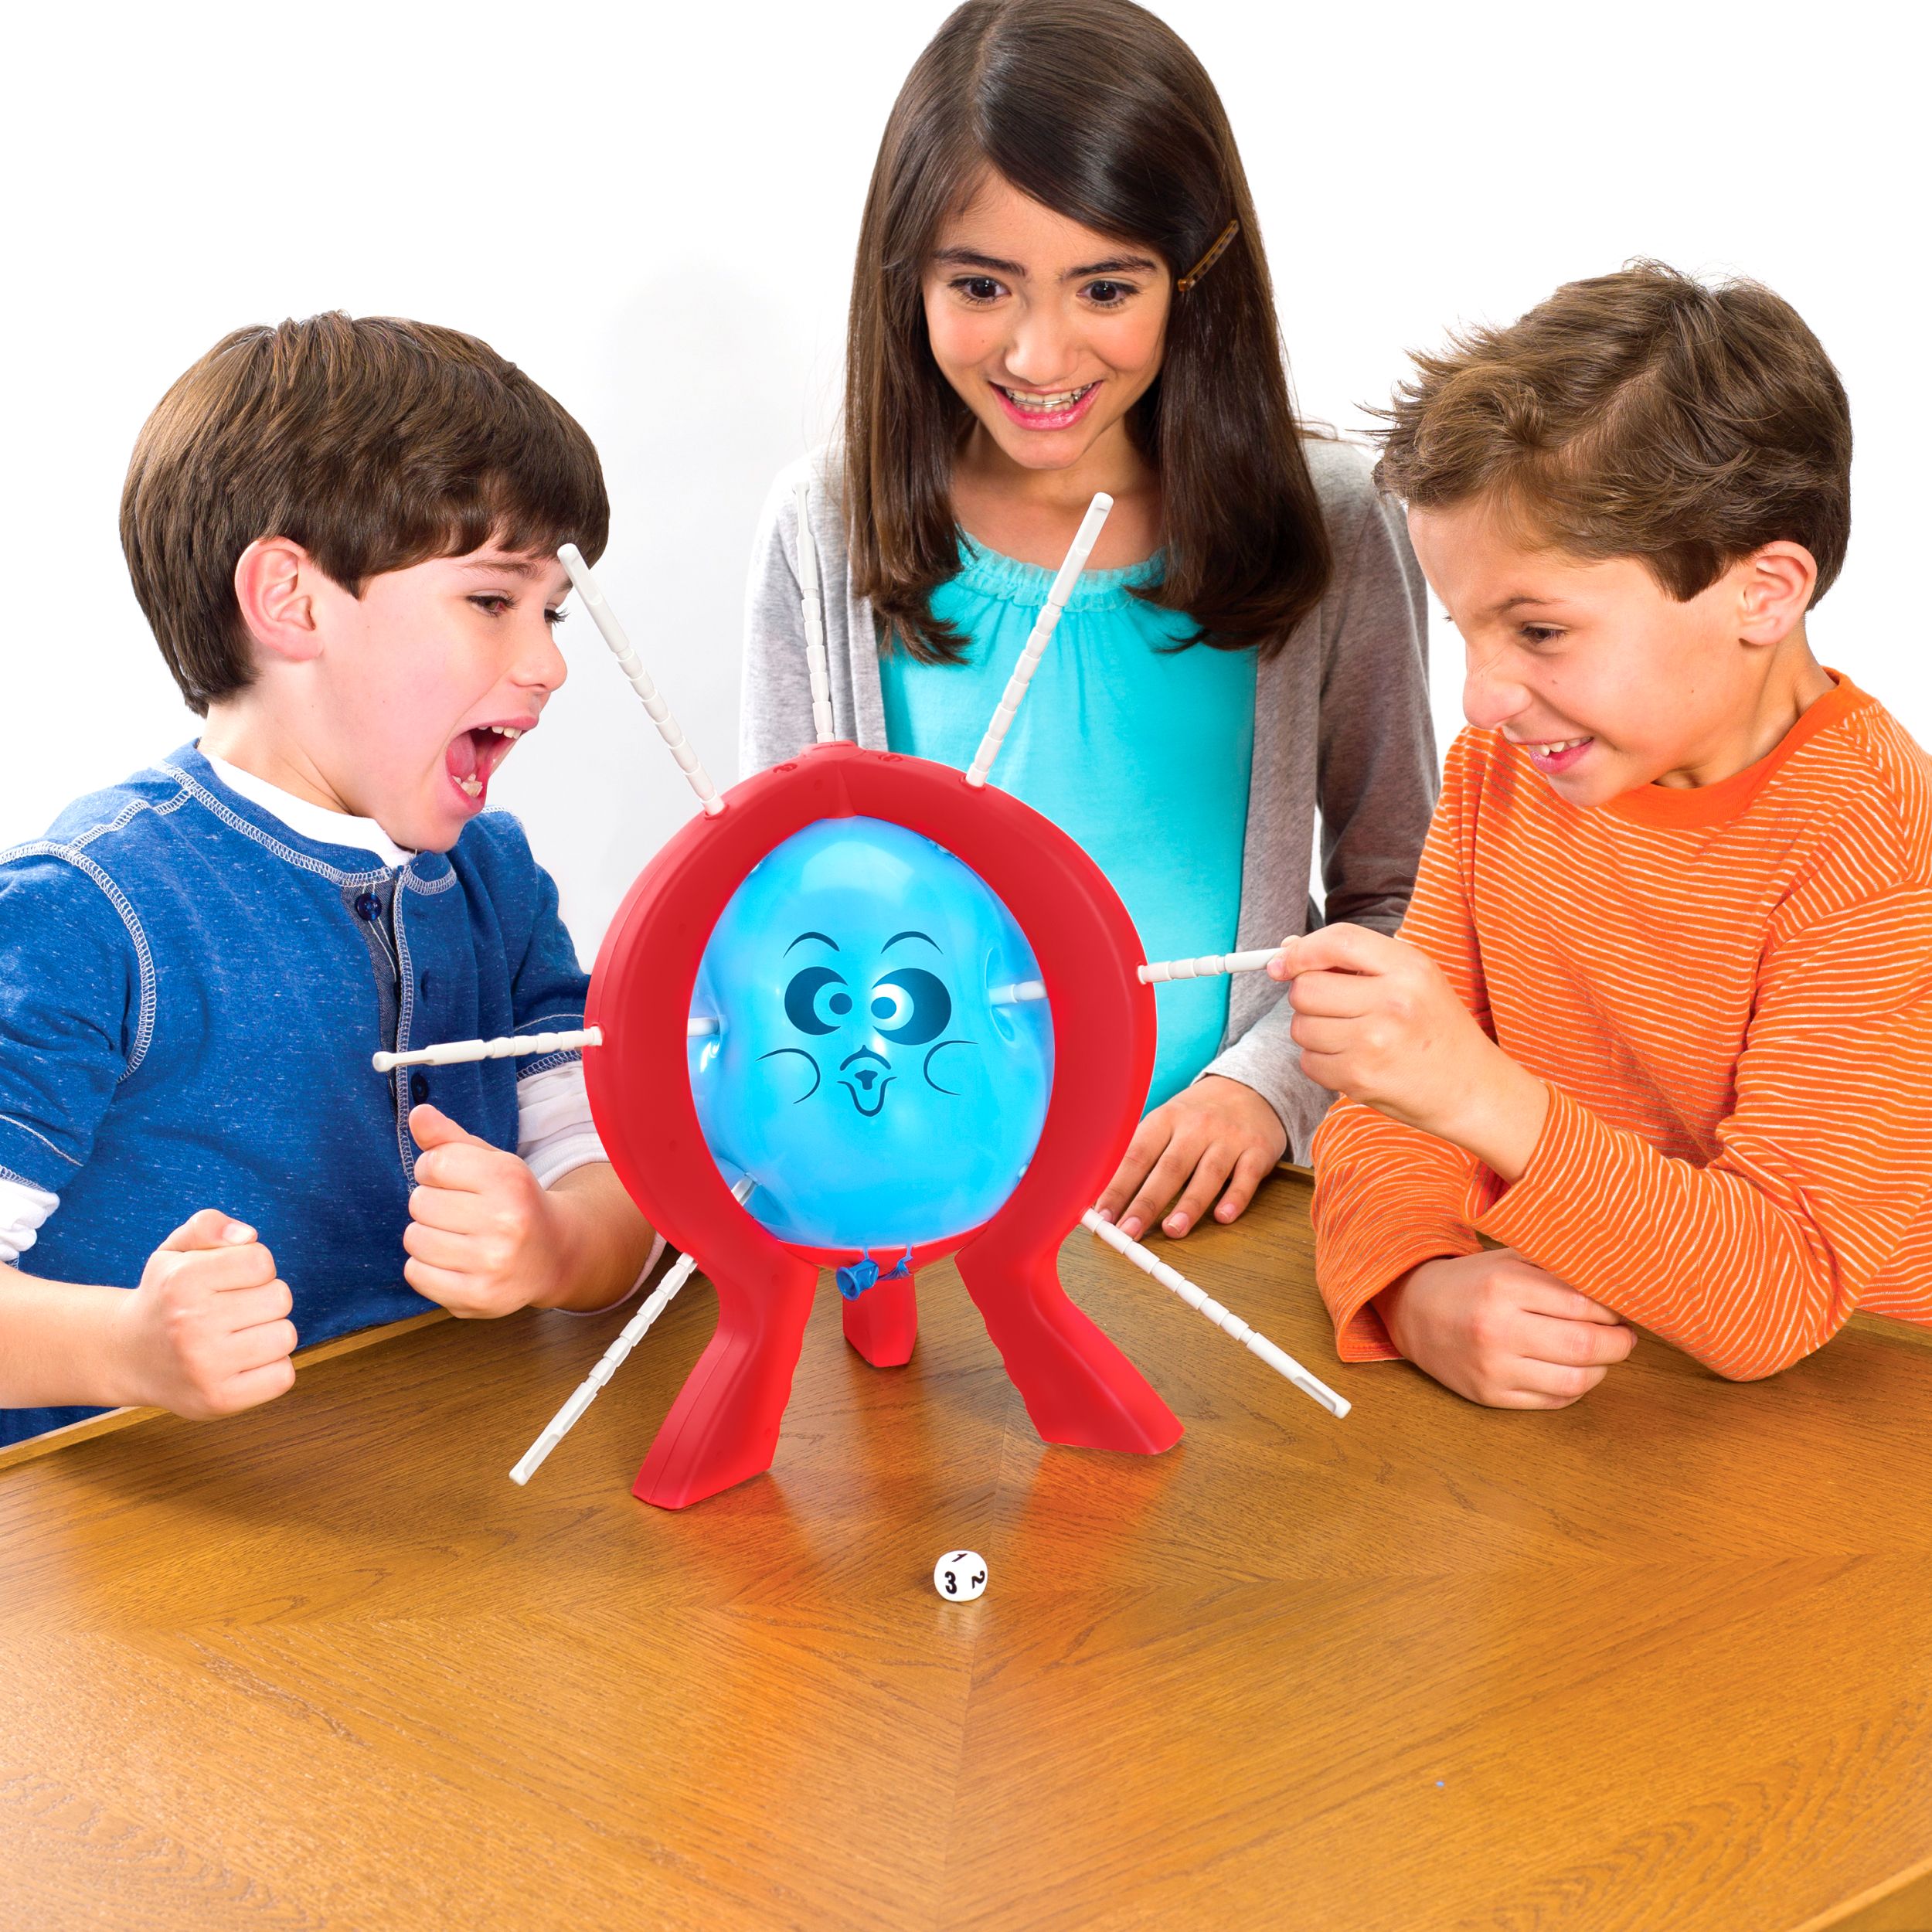 Boom Boom Balloon Game for Kids - image 3 of 5